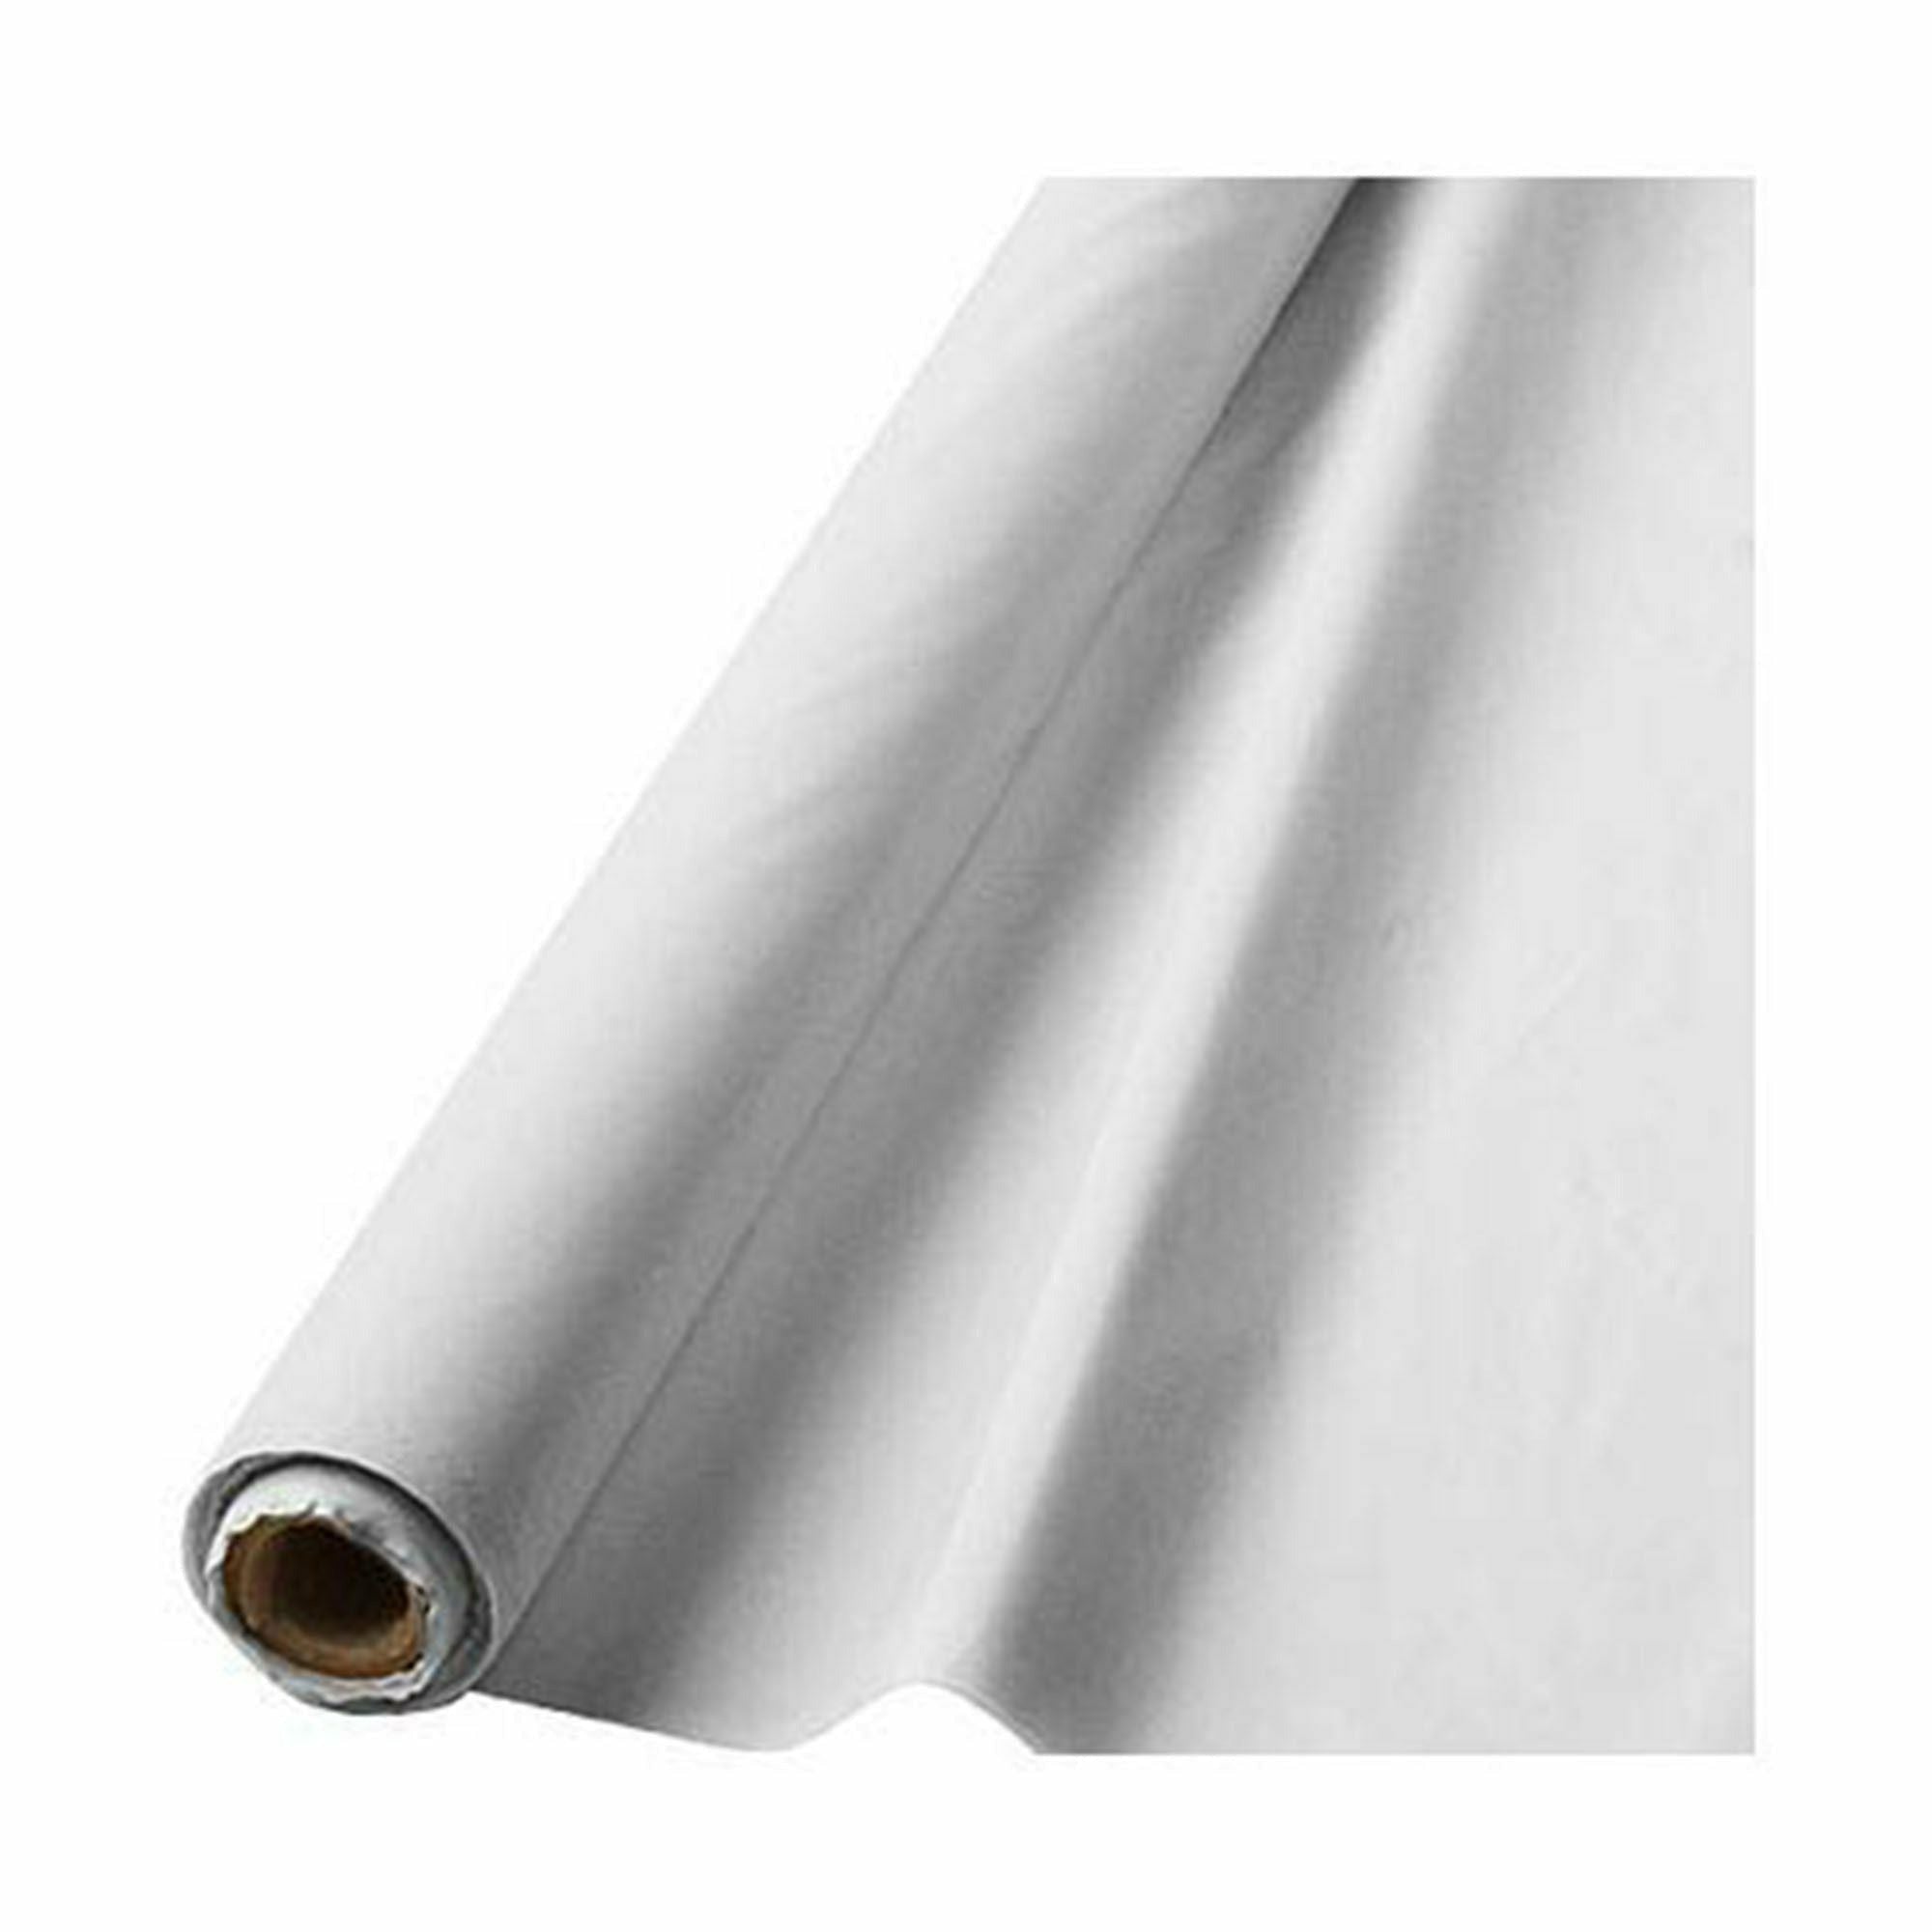 Amscan BASIC Frosty White Plastic Table Cover Roll